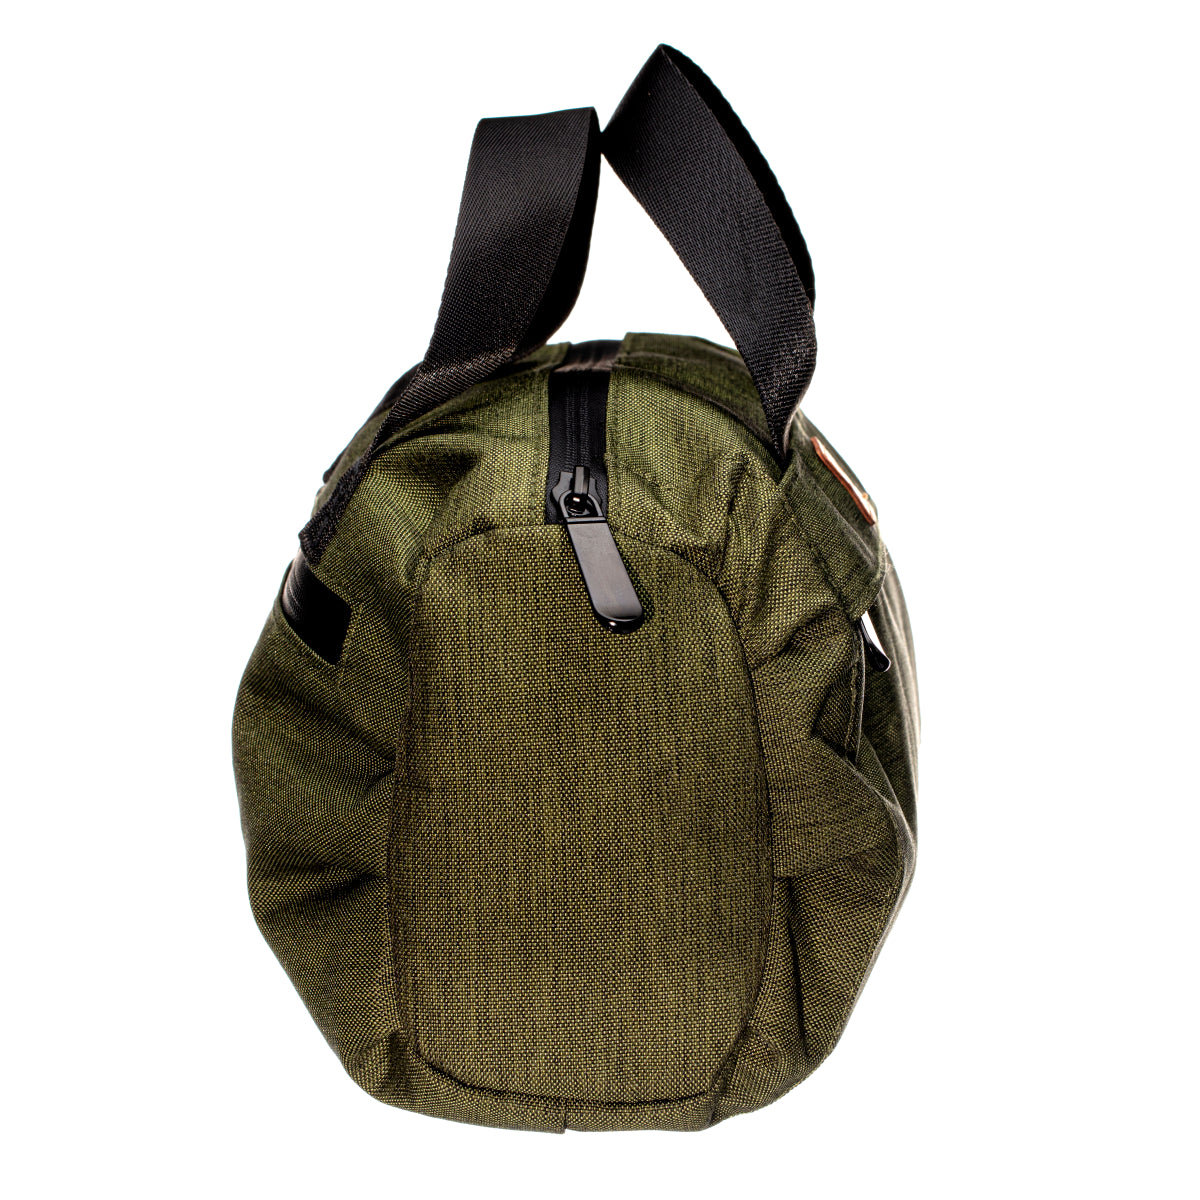 Marley Scent Free Bag